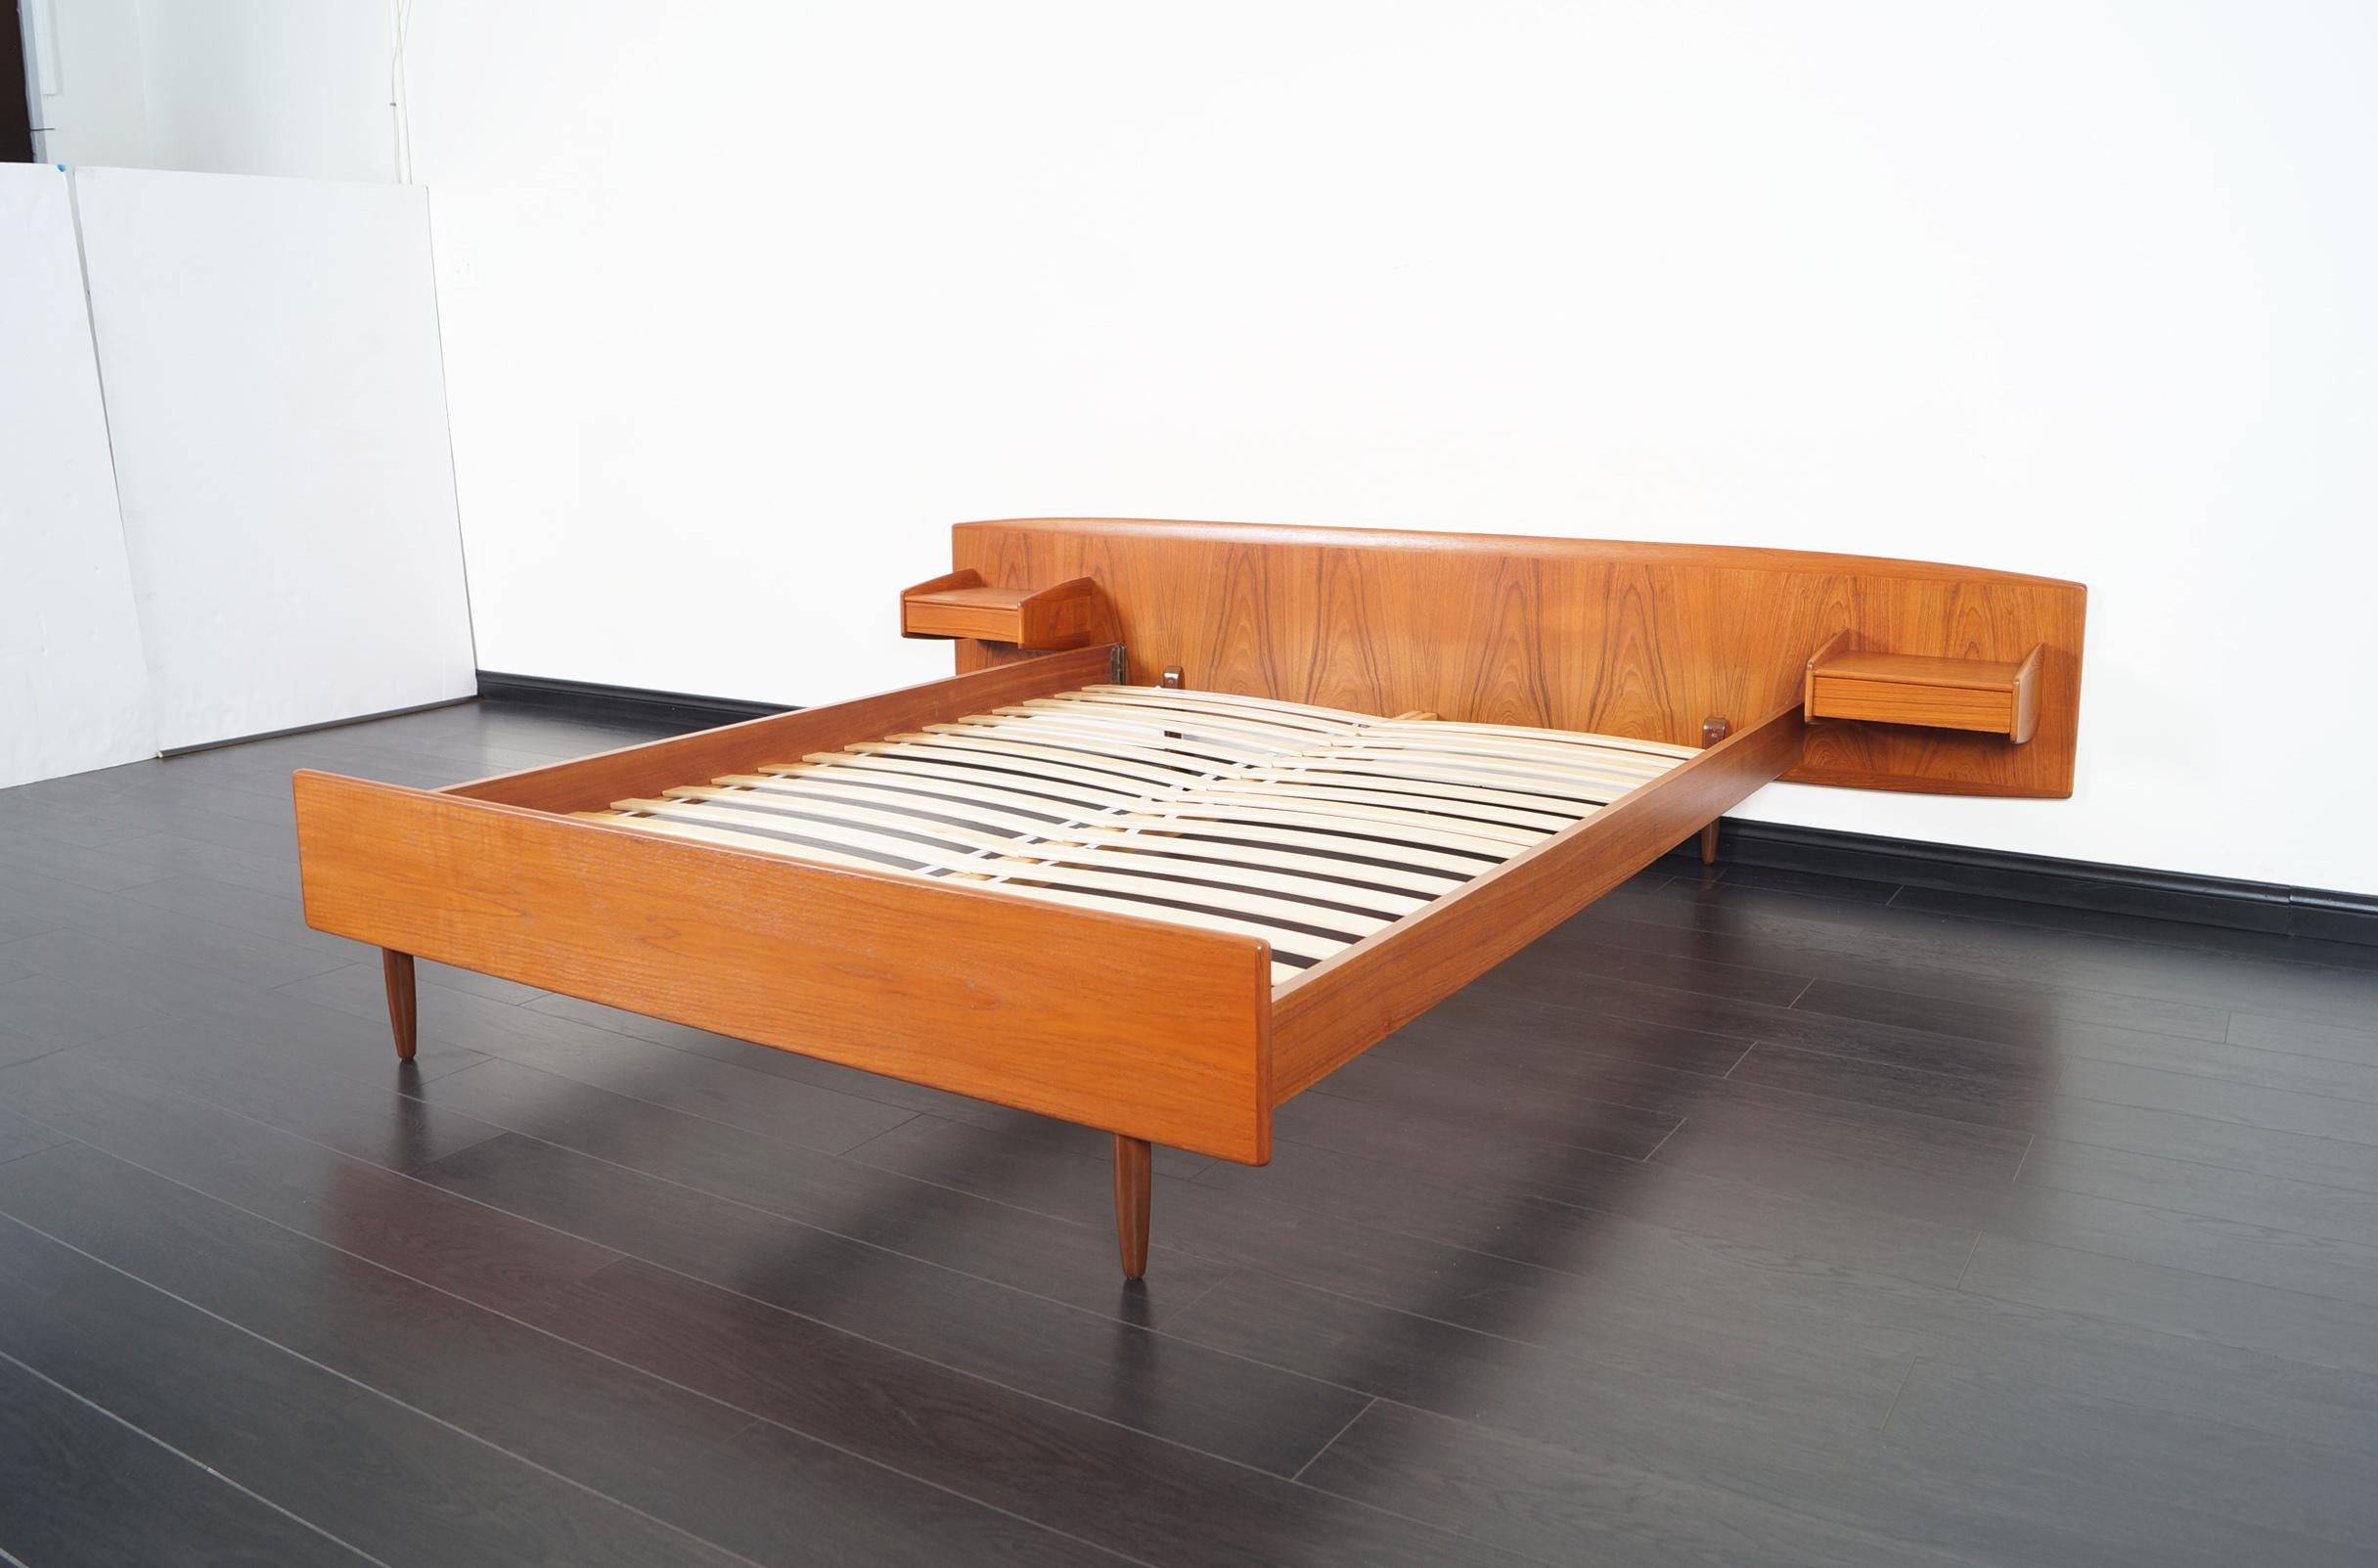 An incredible Danish modern teak queen bed designed by Melvin Mikkelsen for Melvin Mikkelsen Møbler, Pandrup, Denmark. Features a pair of floating nightstands, each with a single dovetailed drawer.